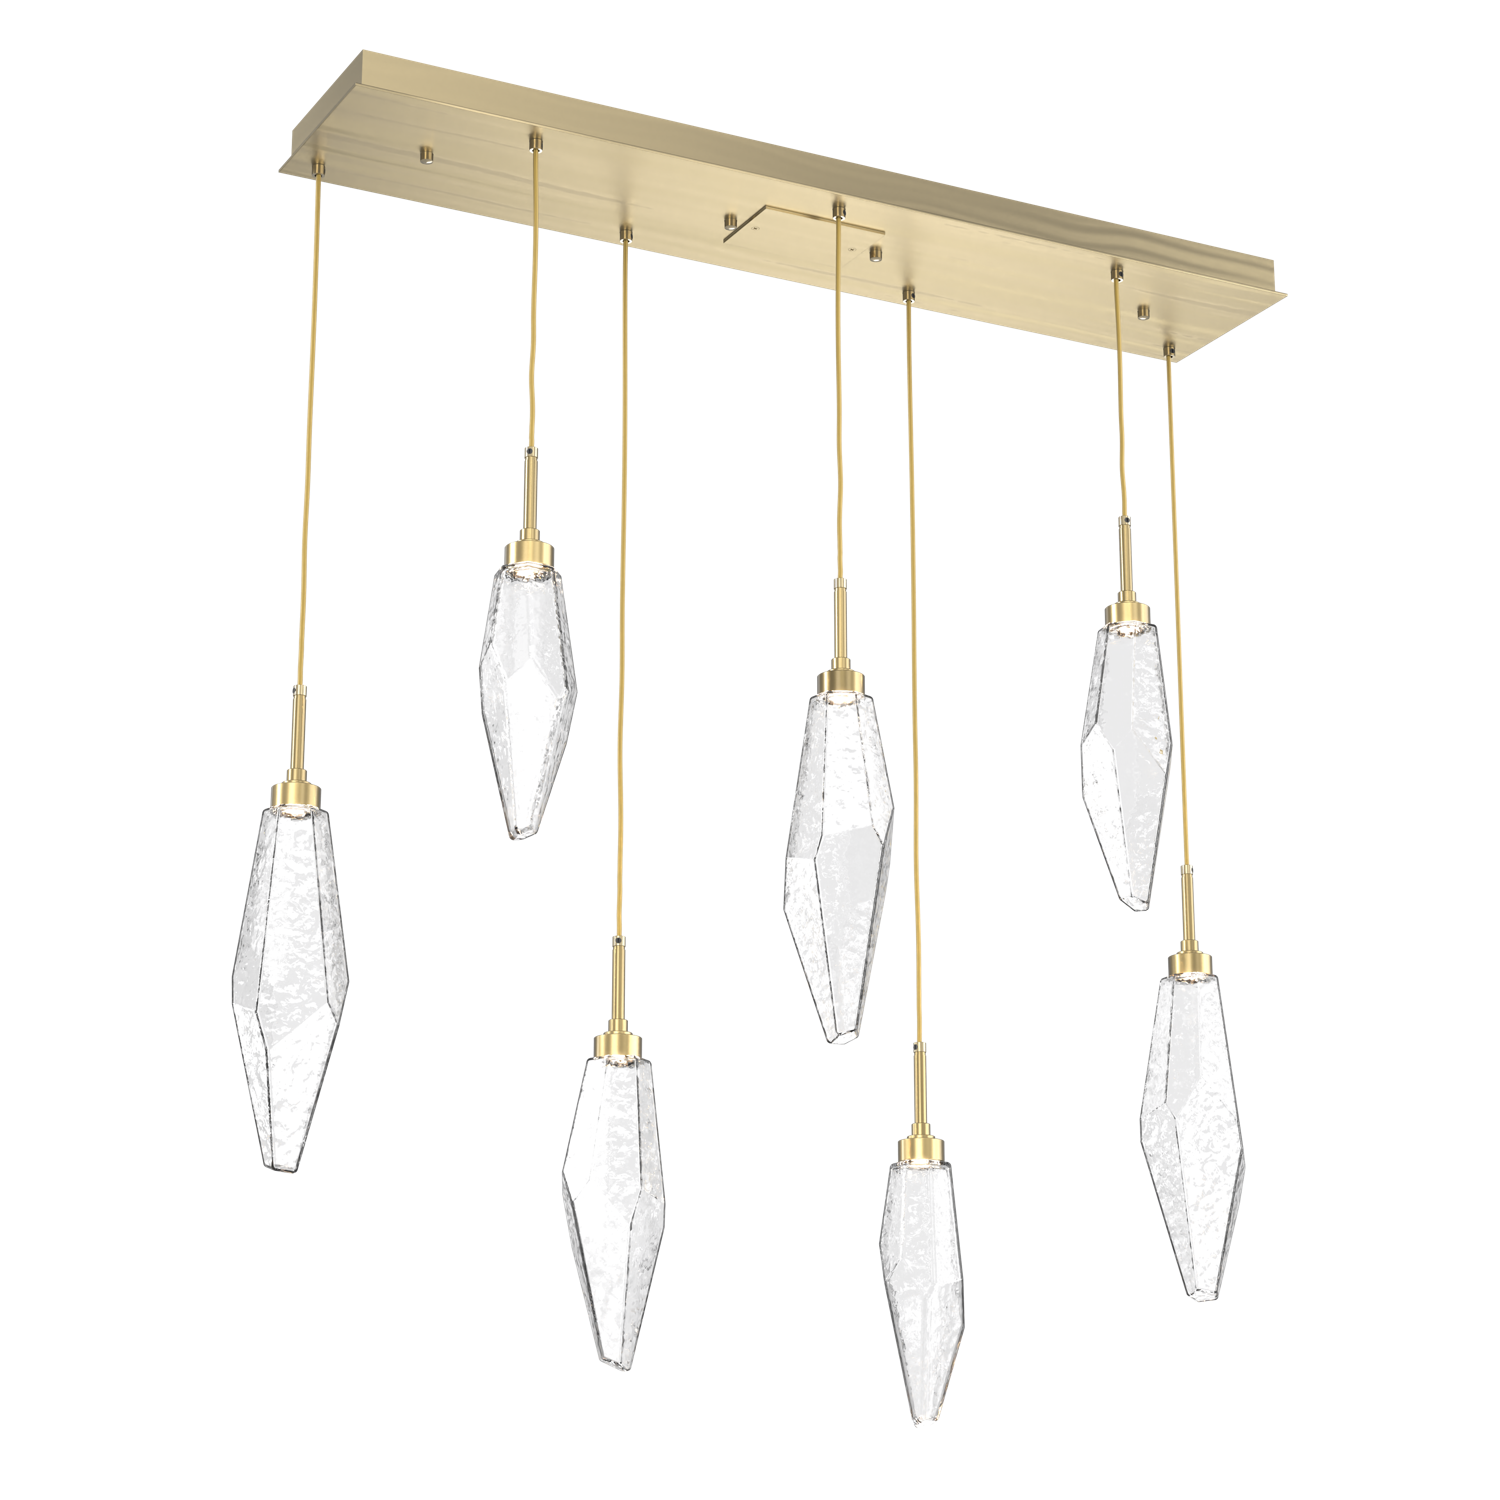 PLB0050-07-HB-CC-Hammerton-Studio-Rock-Crystal-7-light-linear-pendant-chandelier-with-heritage-brass-finish-and-clear-glass-shades-and-LED-lamping